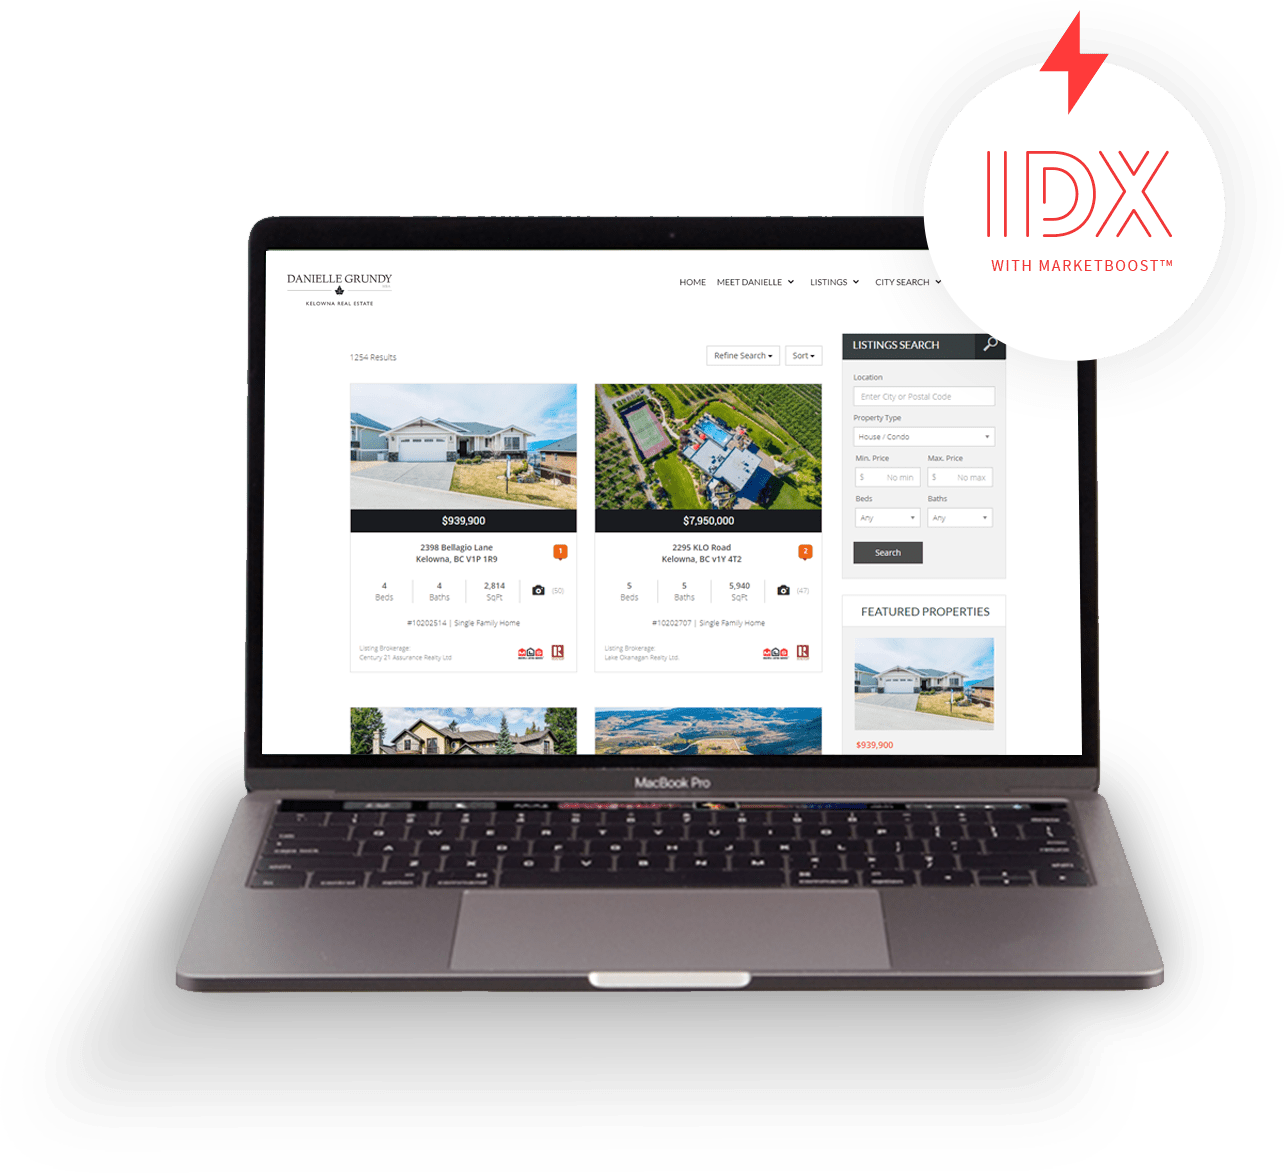 Add Smart MLS Search & IDX Listings to Your Site - Showcase IDX